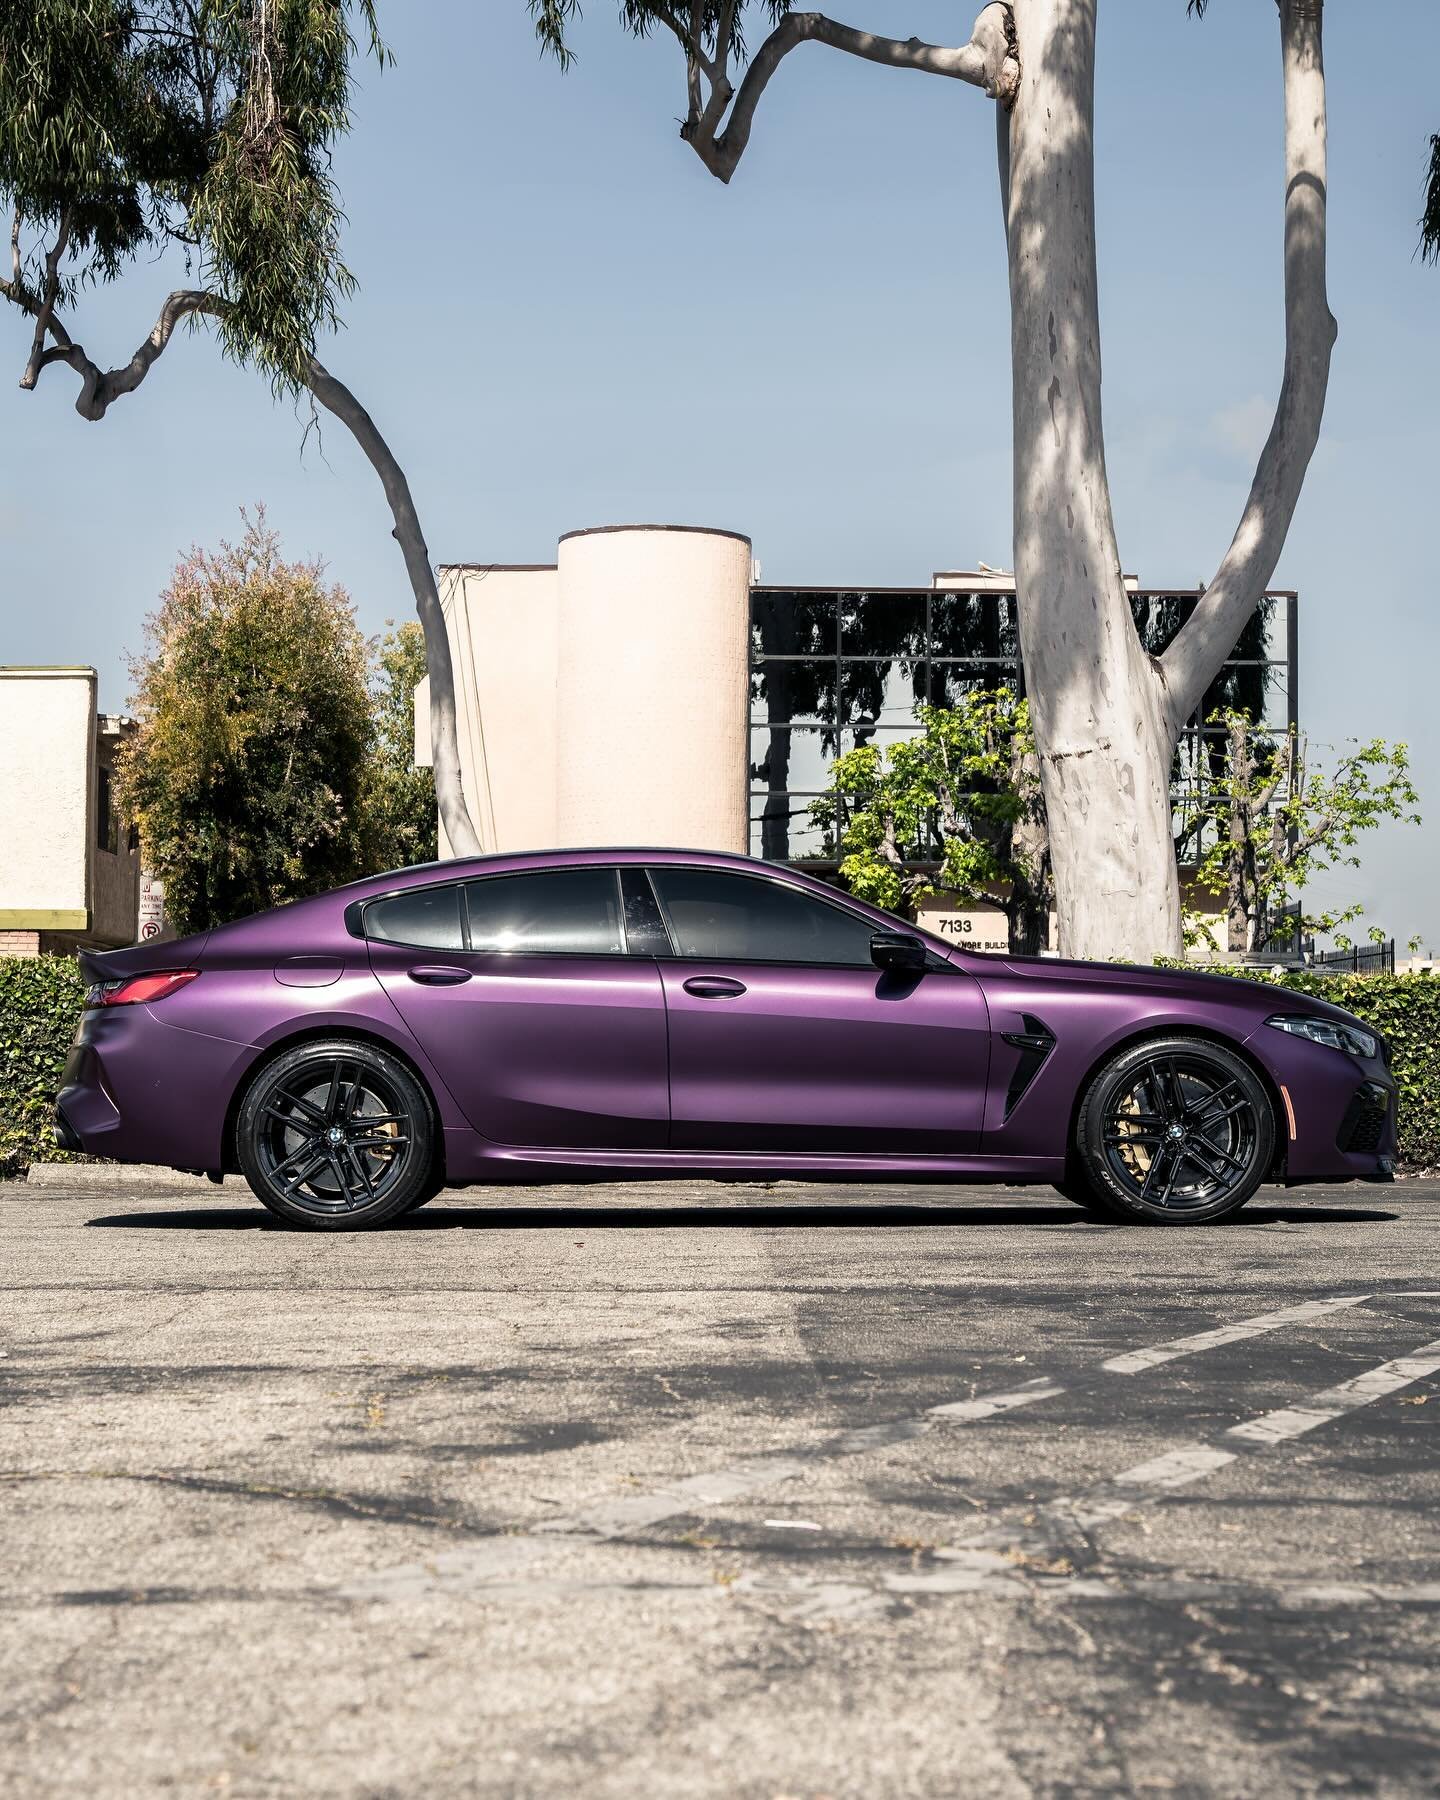 The 2024 @BMW M8 Competition in Frozen Purple . Scratches and damage are more expensive to fix with a matte finish, so the car was protected with PPF across every inch to give the owner peace of mind.

▪️▪️▪️▪️▪️▪️▪️▪️▪️▪️▪️▪️▪️▪️▪️▪️▪️▪️ ▪️ ▪️ ▪️ ▪️